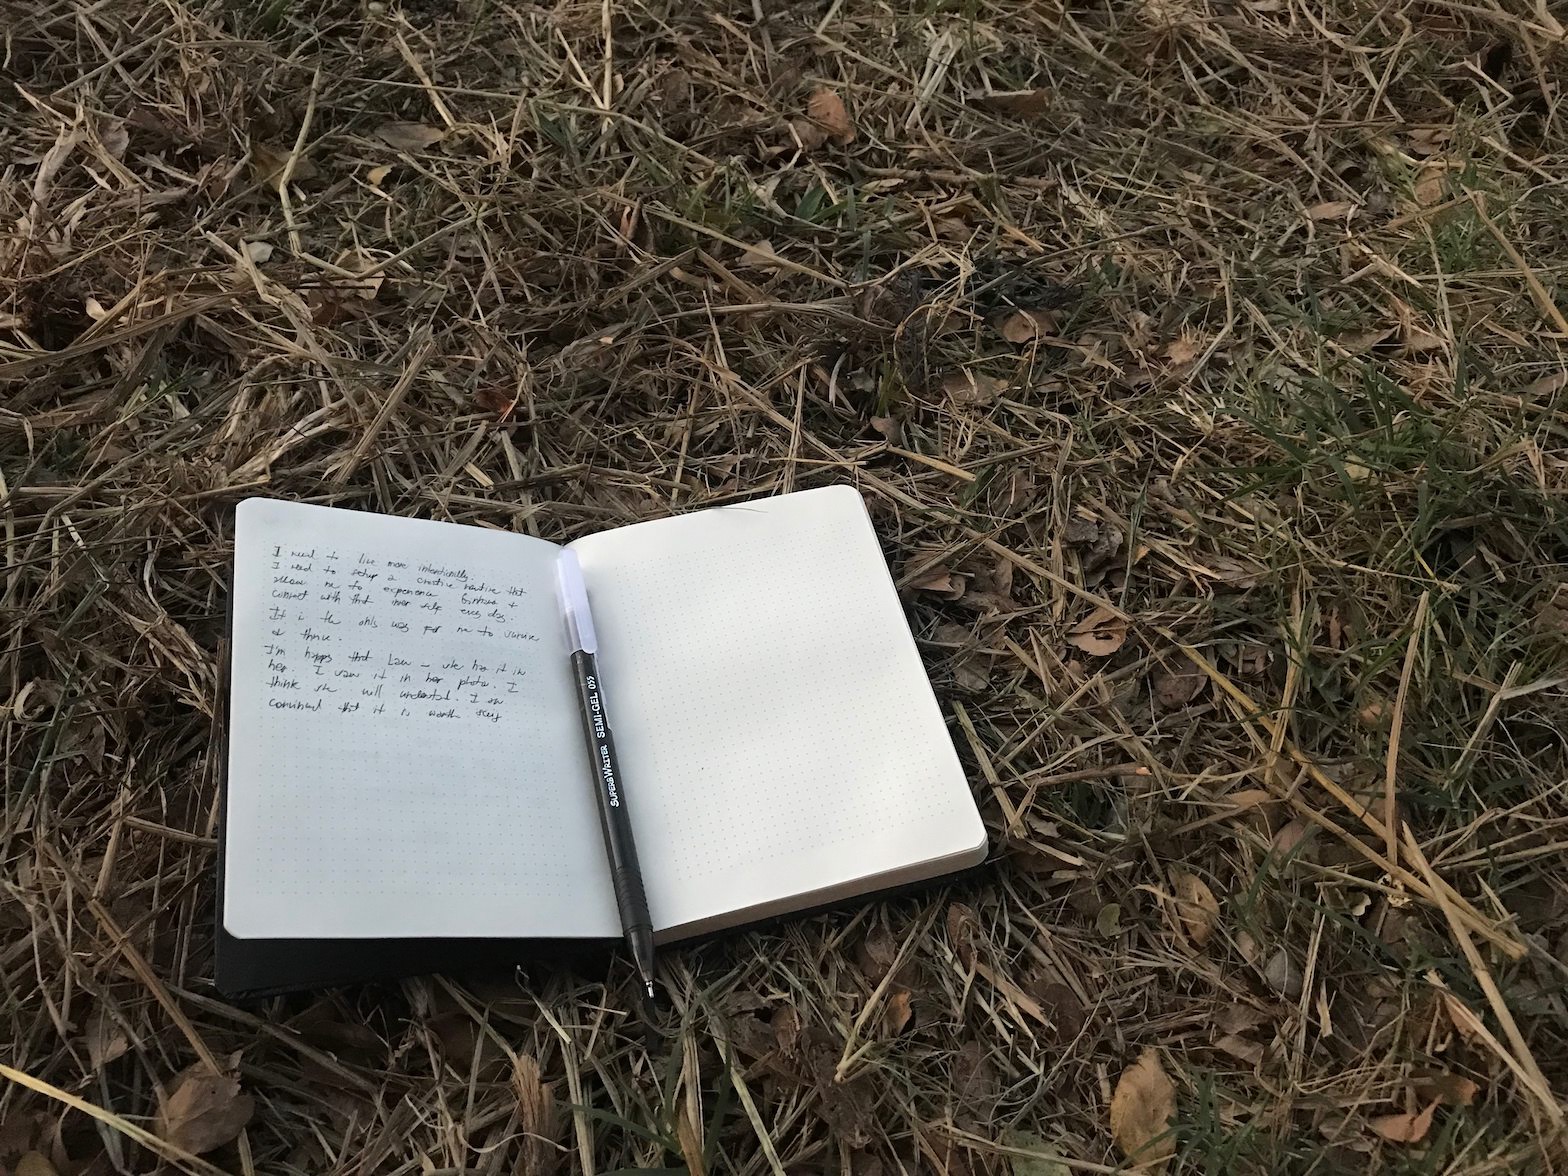 Field notes over dried leaves and straw